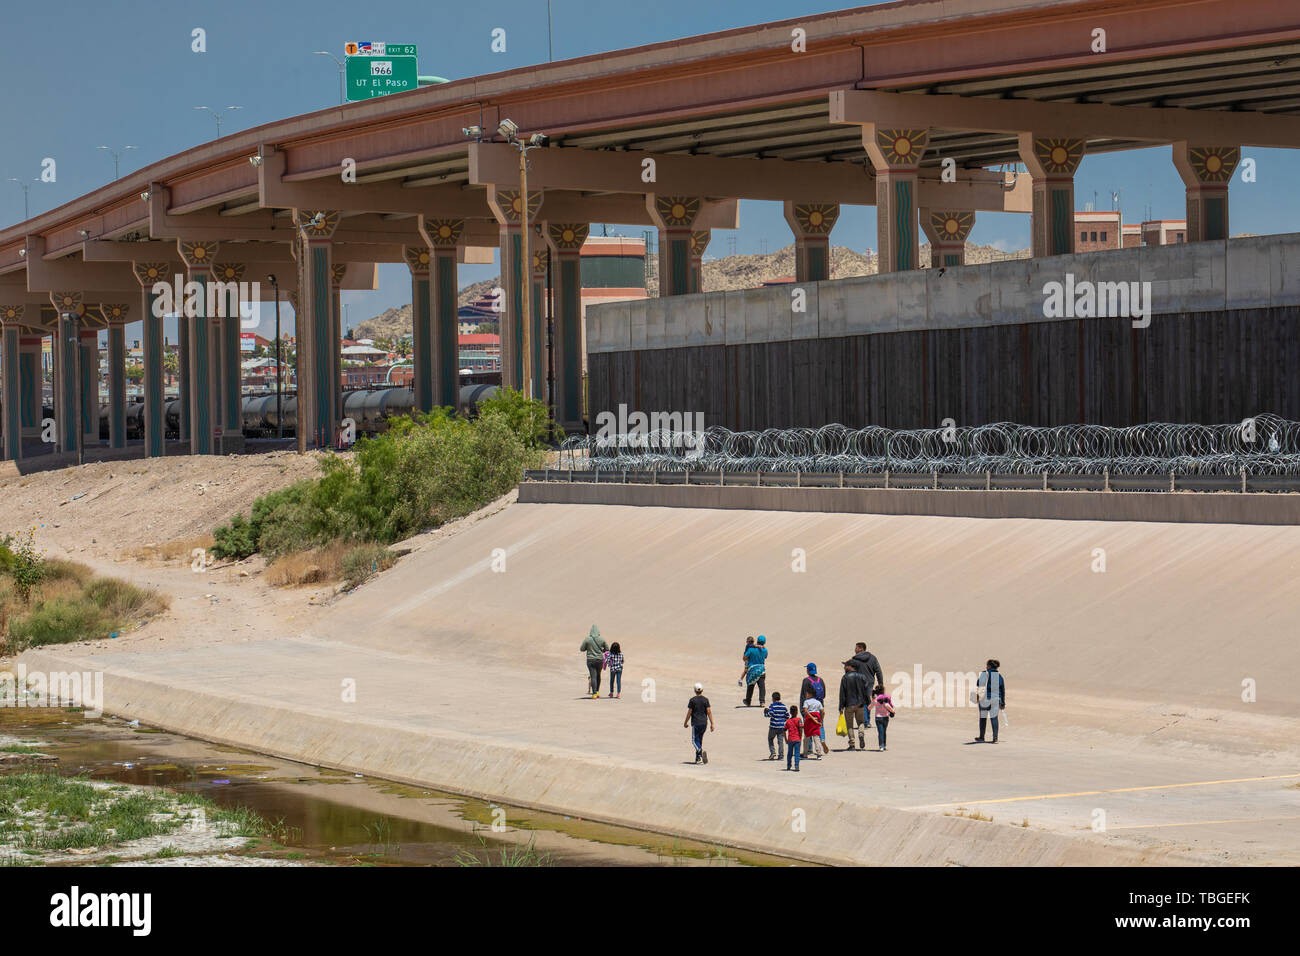 A group of migrants walk along the banks of the Rio Grande towards a gap in the Border Wall under a new highway overpass near downtown El Paso, Texas, Stock Photo